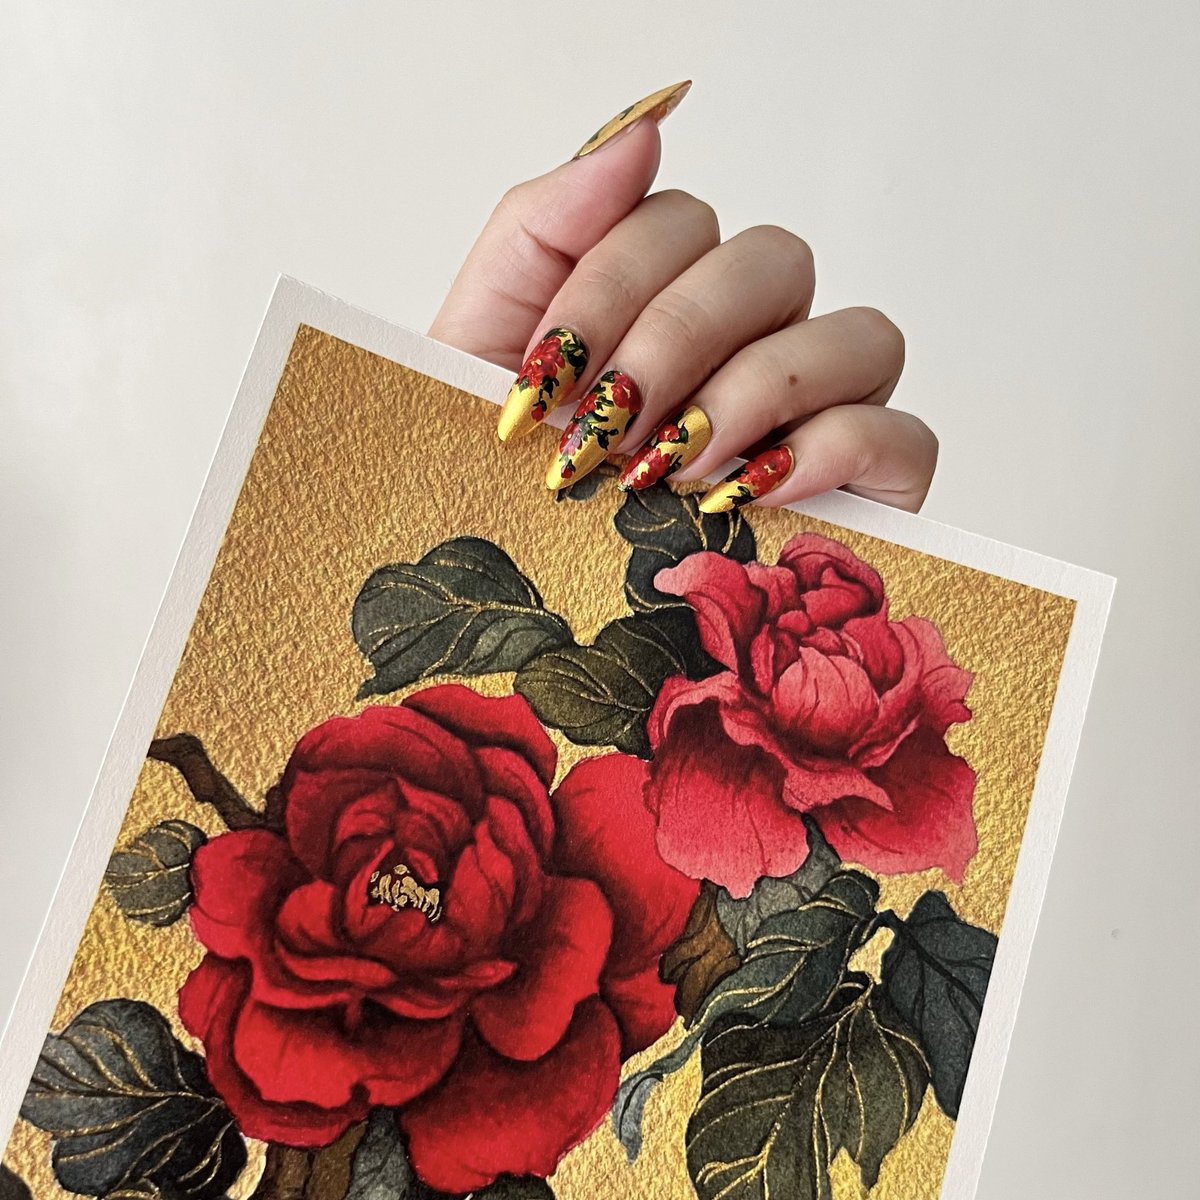 I also started freehand painting on press ons! Here’s my first attempt recreating one of my watercolor paintings into nail art 🌹 I love the idea of press-ons and being able to re-wear nail art for indecisive girlies like me